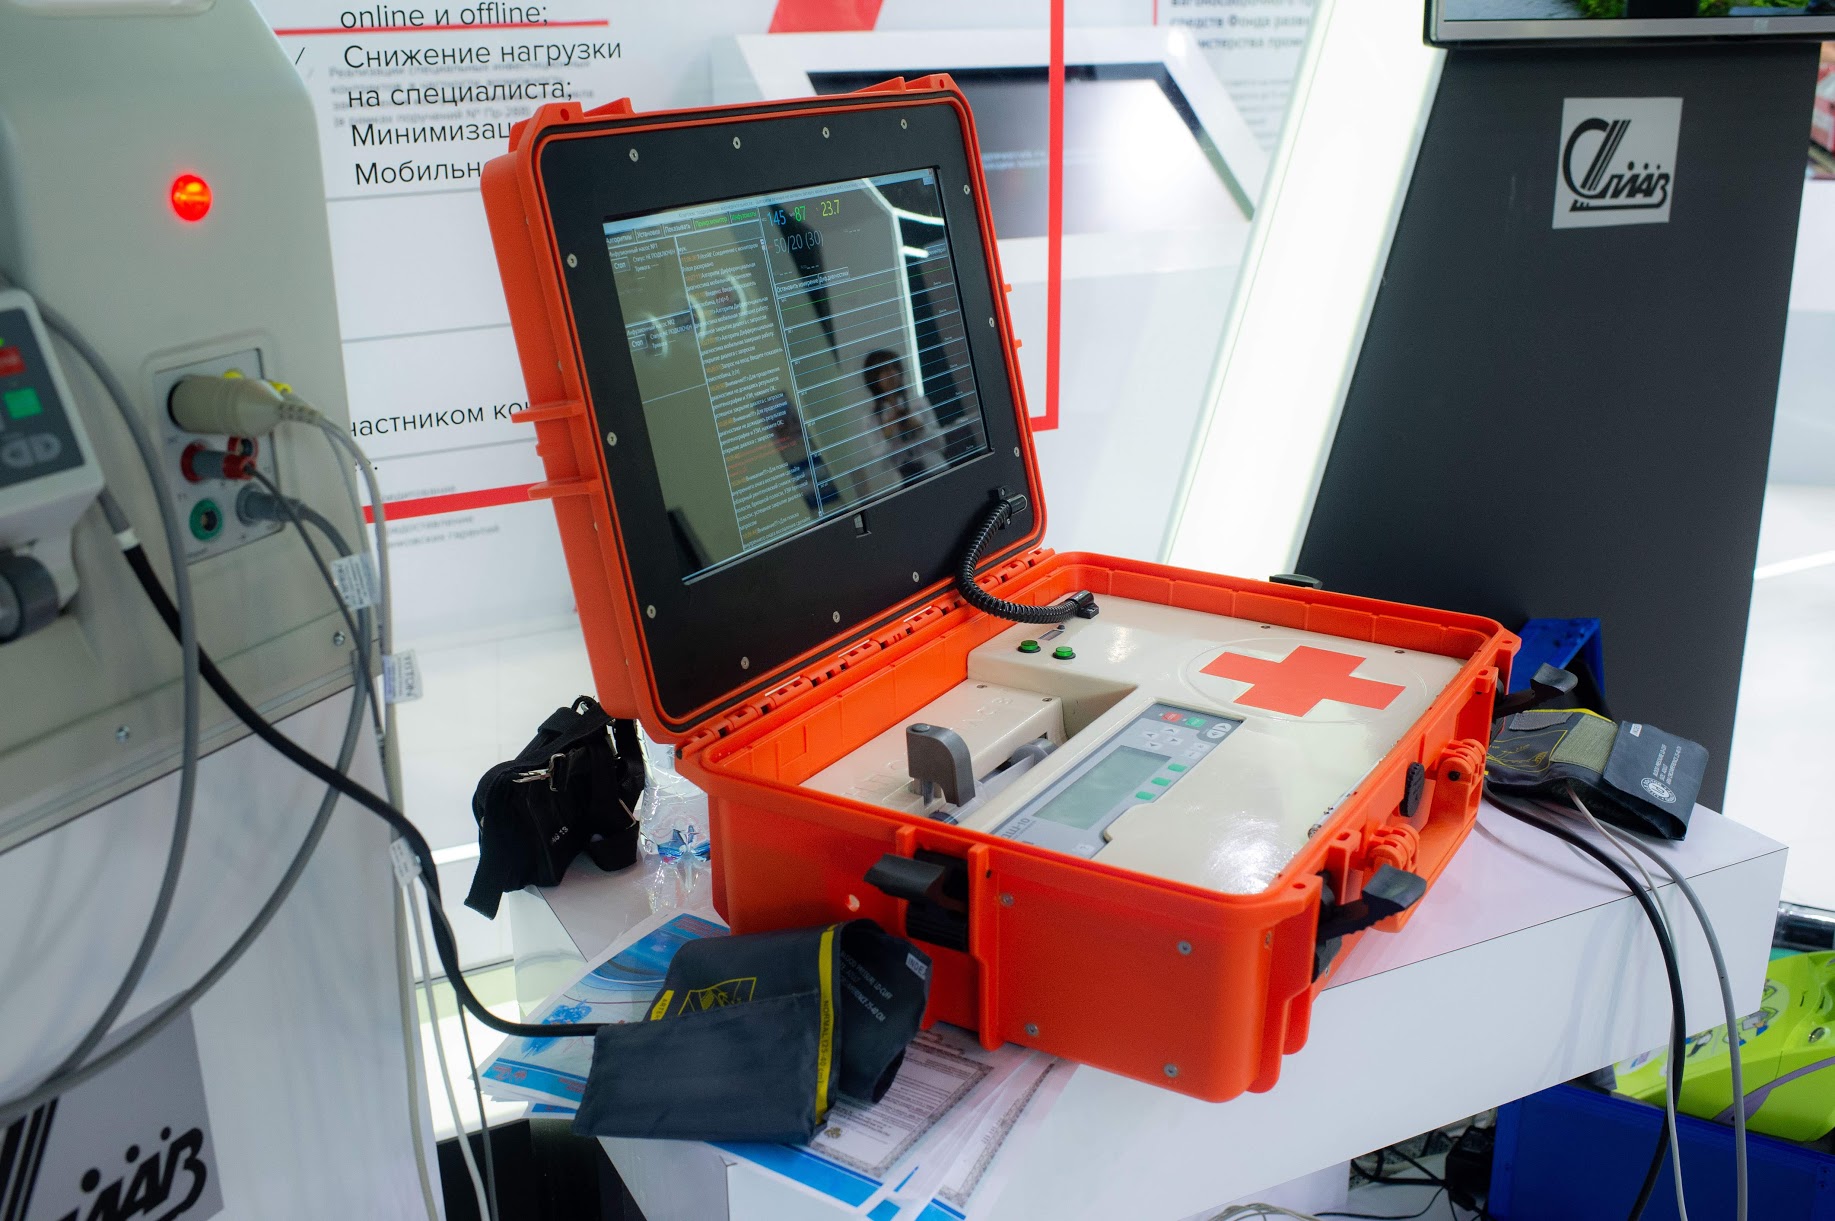 Rostec Will Introduce an Innovative Medical Equipment at the BIOTECHMED Forum